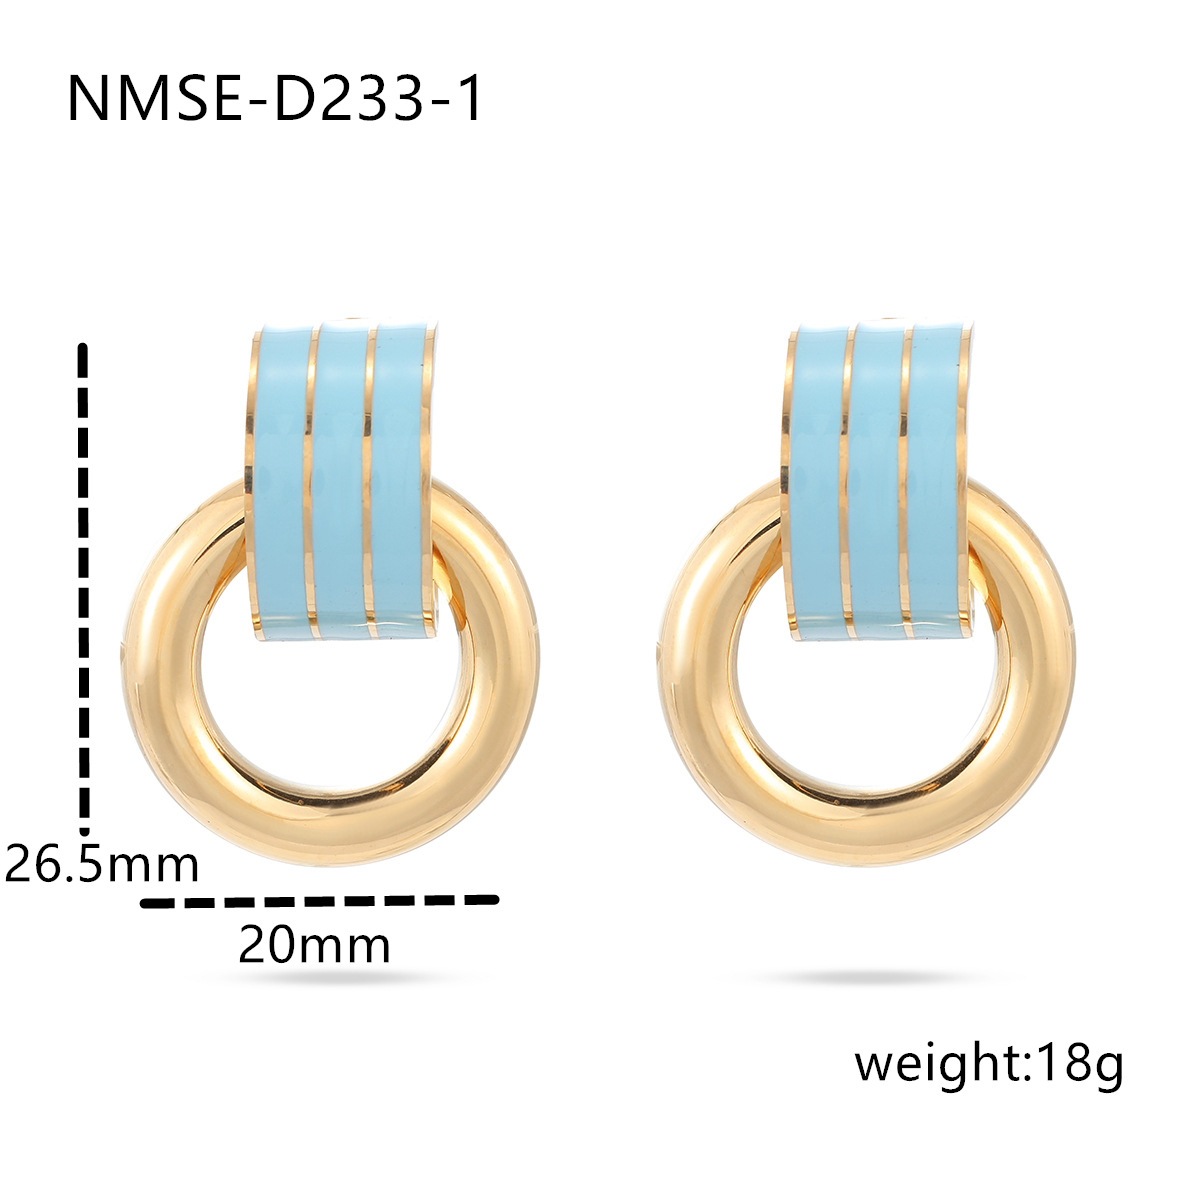 NMSE-D233-1